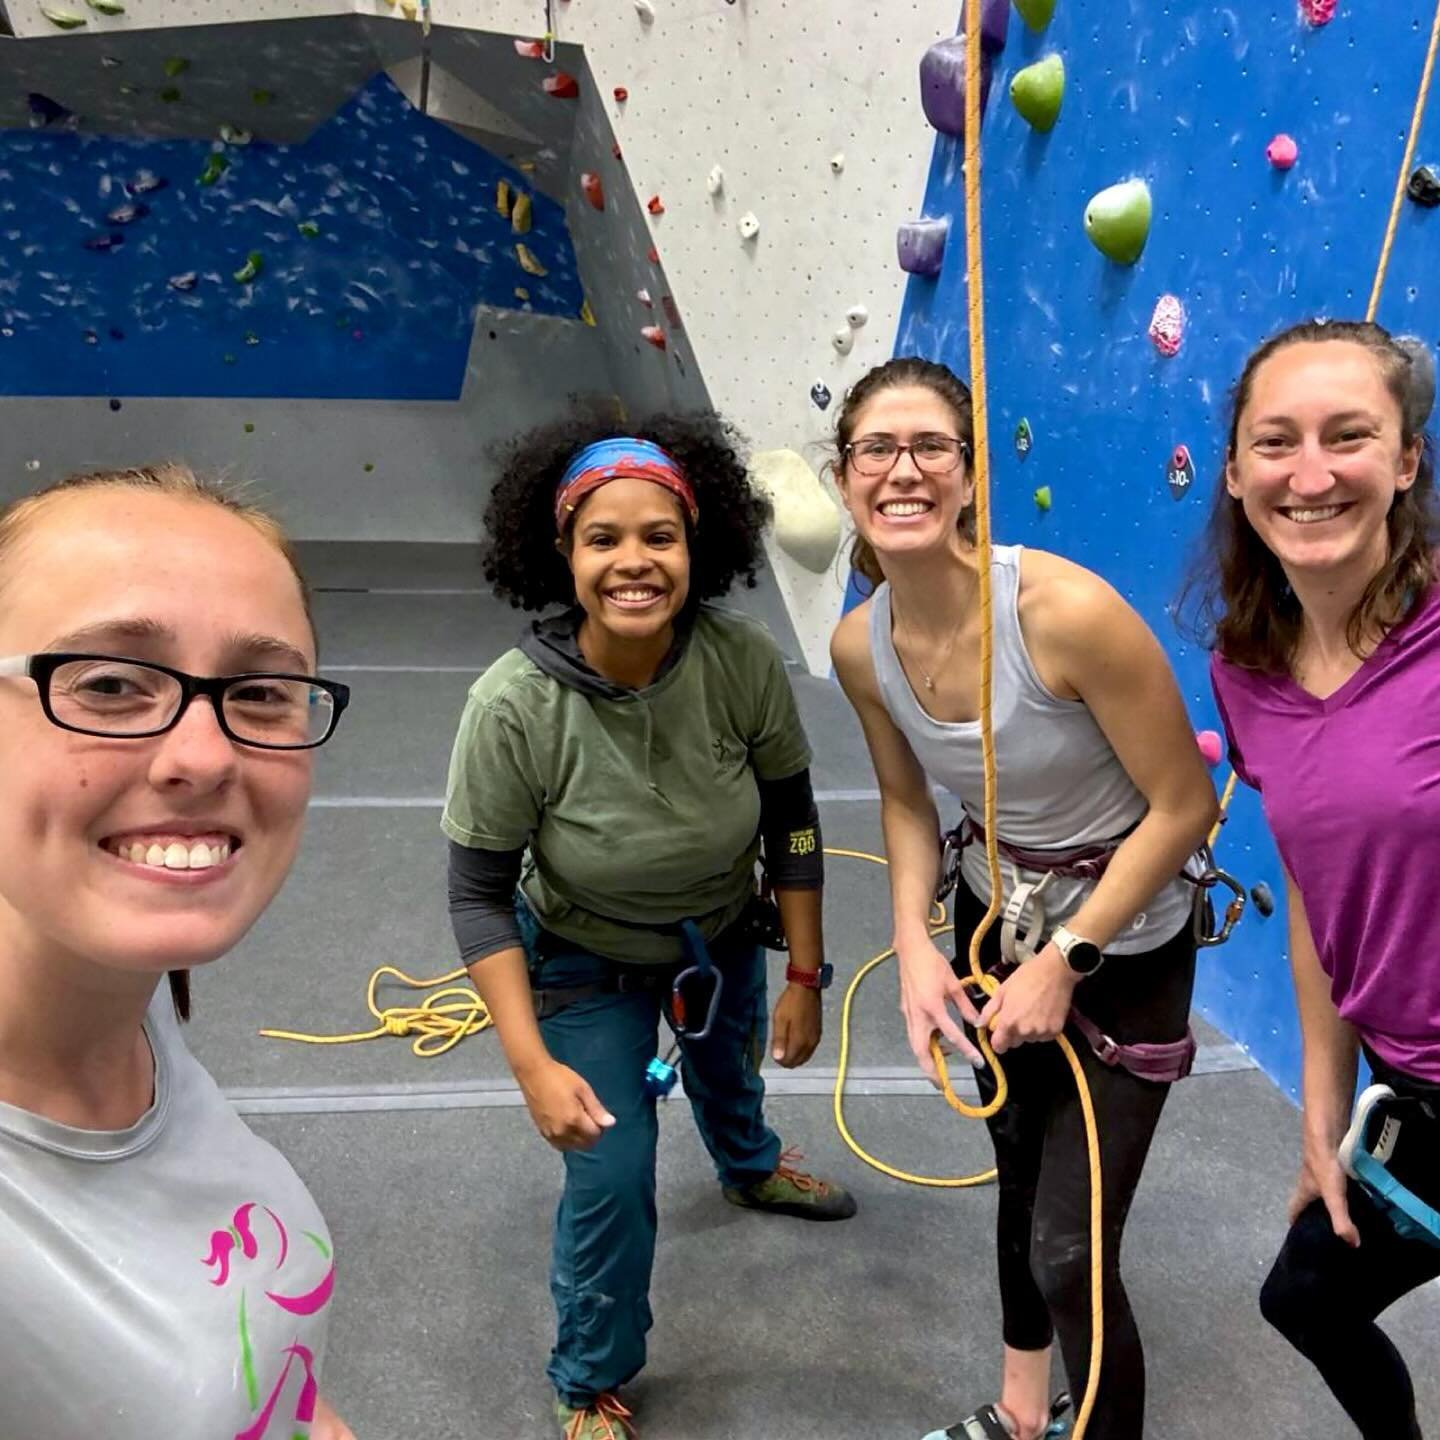 Another great meetup in the books! Thanks to everyone who joined us at @movementgymsdmv Columbia. Your energy and encouragement is always what makes these meetups awesome! 

Shout-out to our ambassador, Claudia, for hosting and getting her lead tag! 